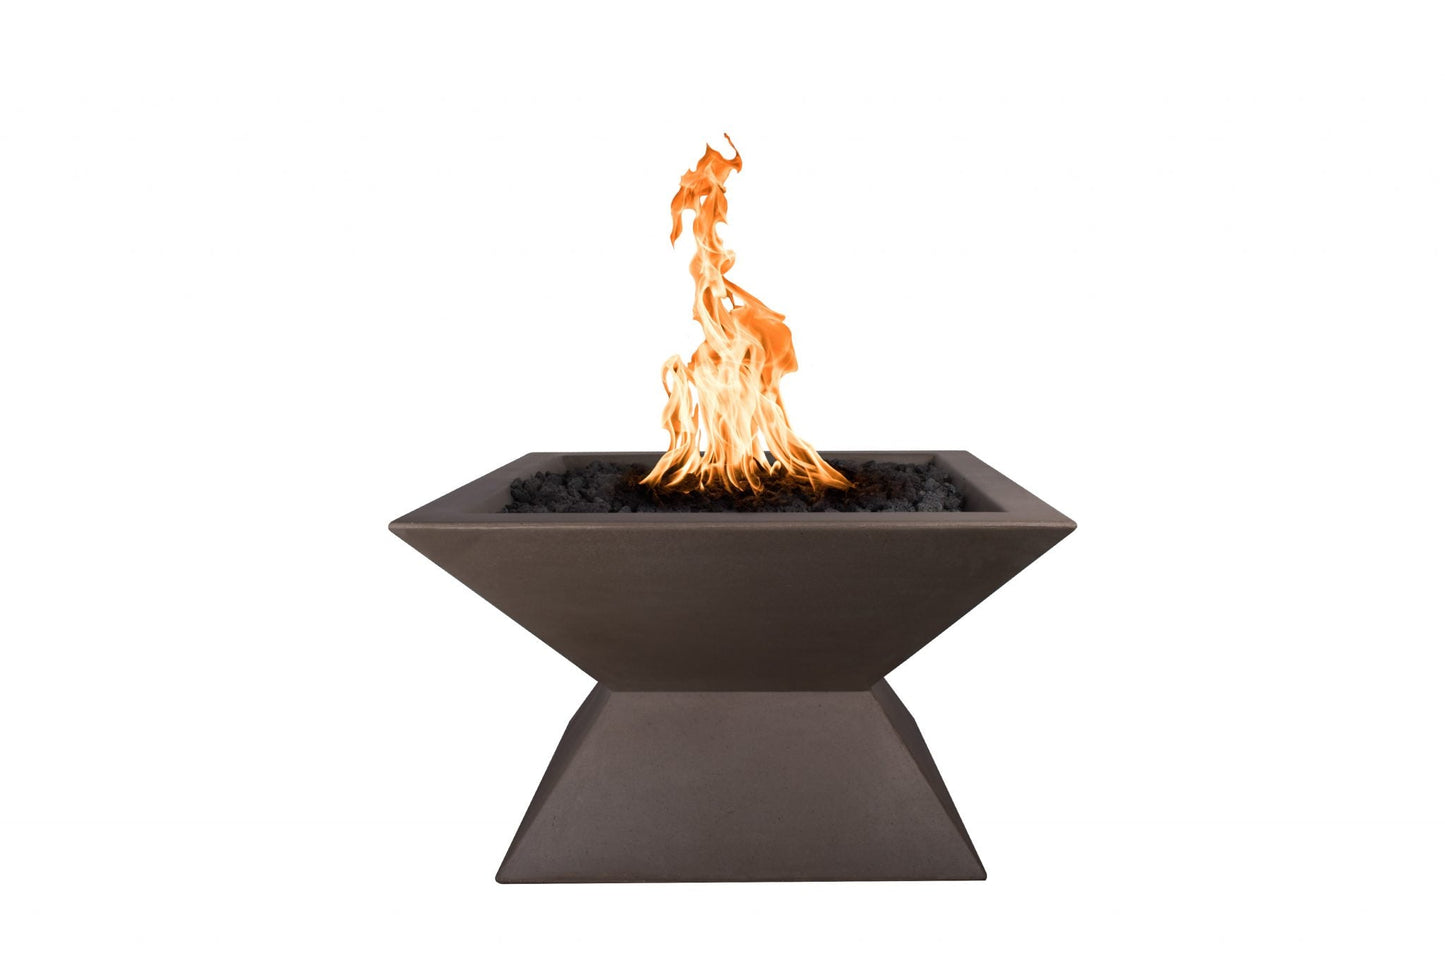 The Outdoor Plus Square Uxmal 30" Stainless Steel Natural Gas Fire Pit with 110V Electronic Ignition